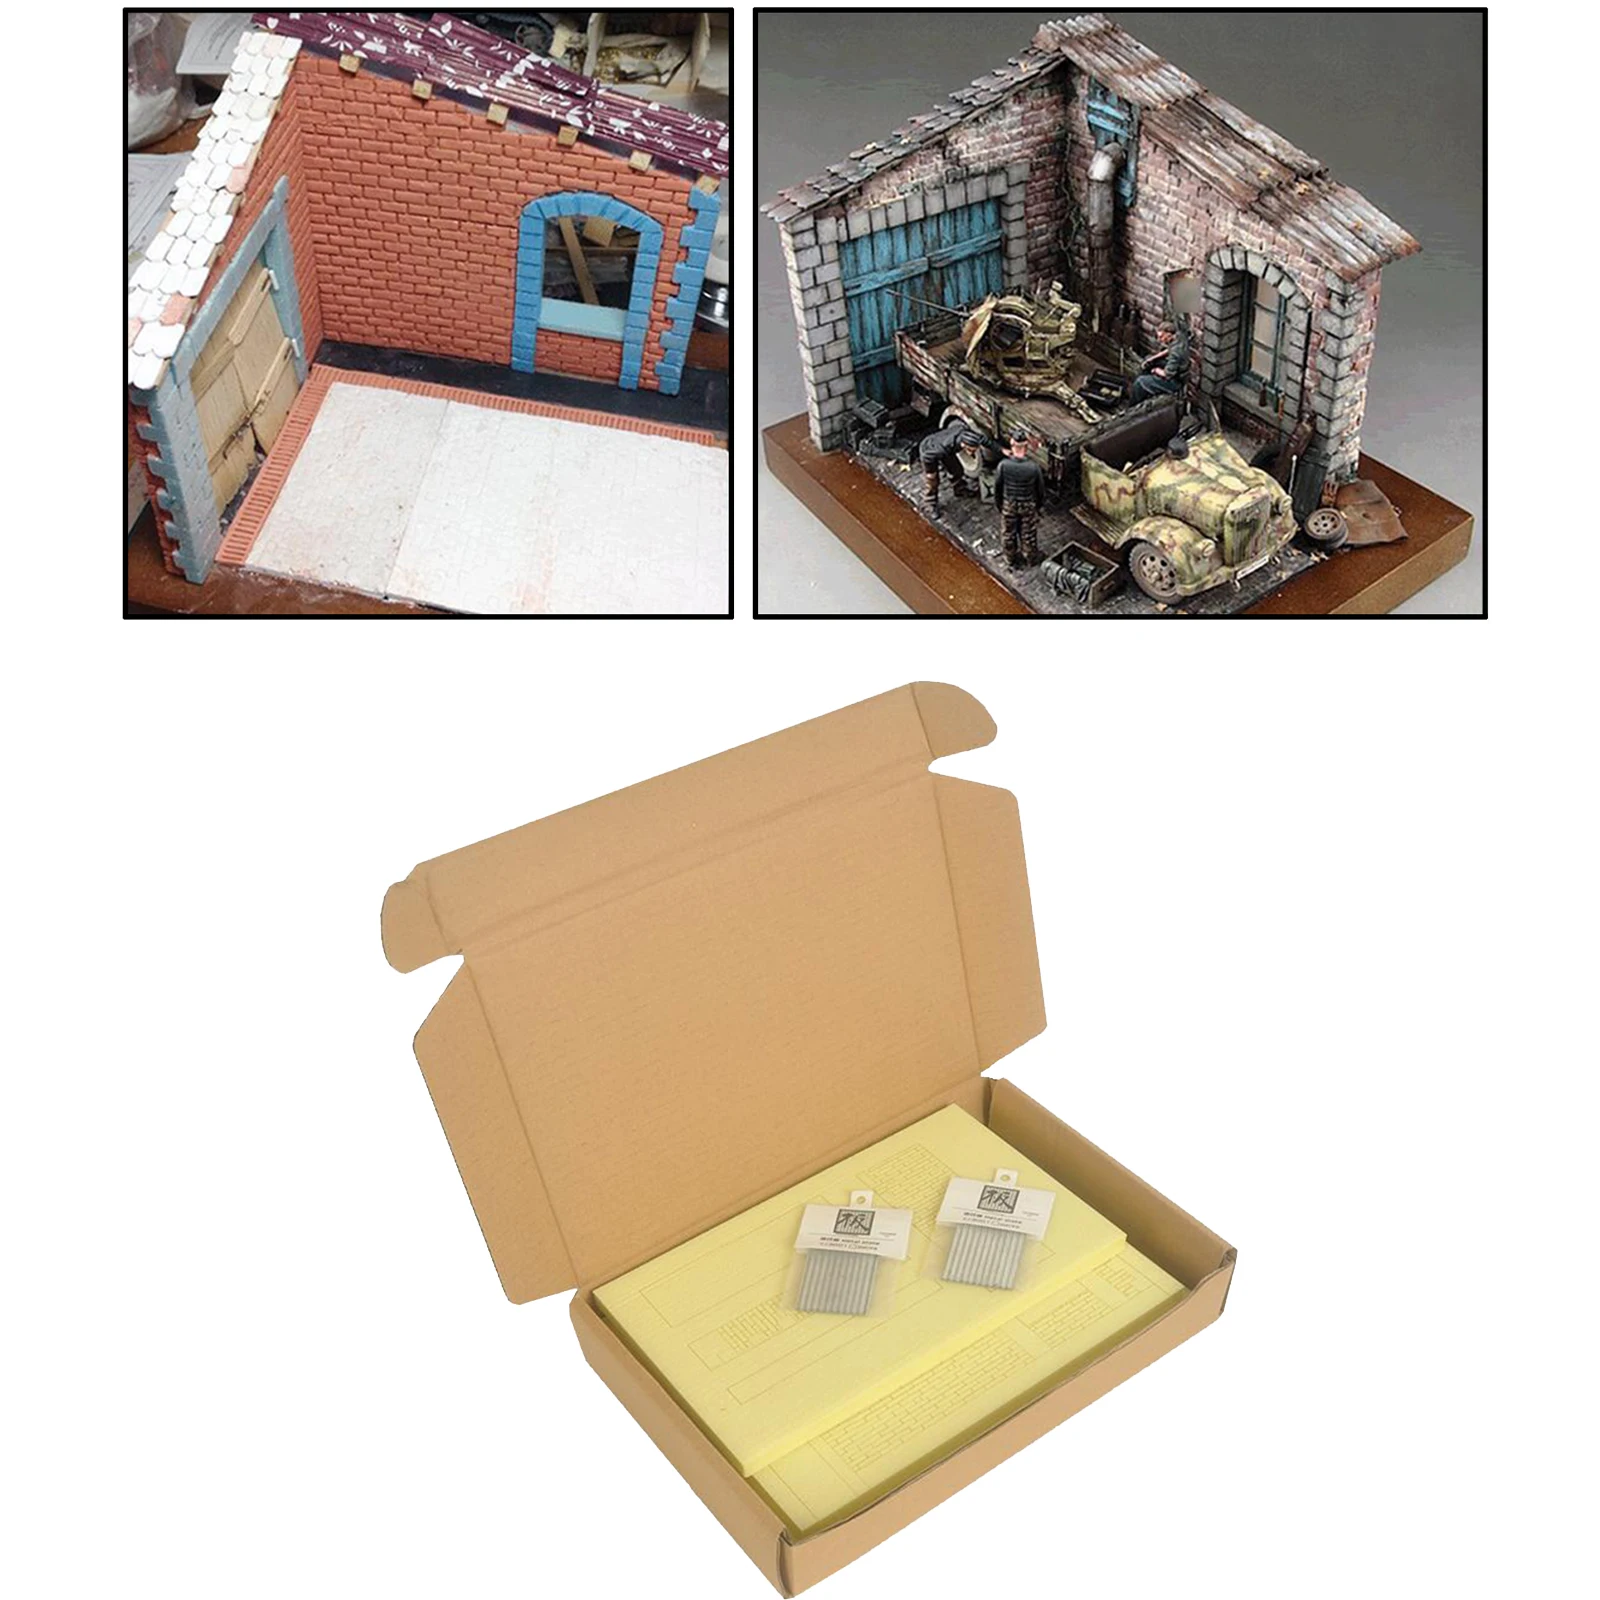 Hobby Crafts Building 3D Puzzle Unassembled Kits European Ruins House 1:35 Scale Miniature Sand Table War Layout